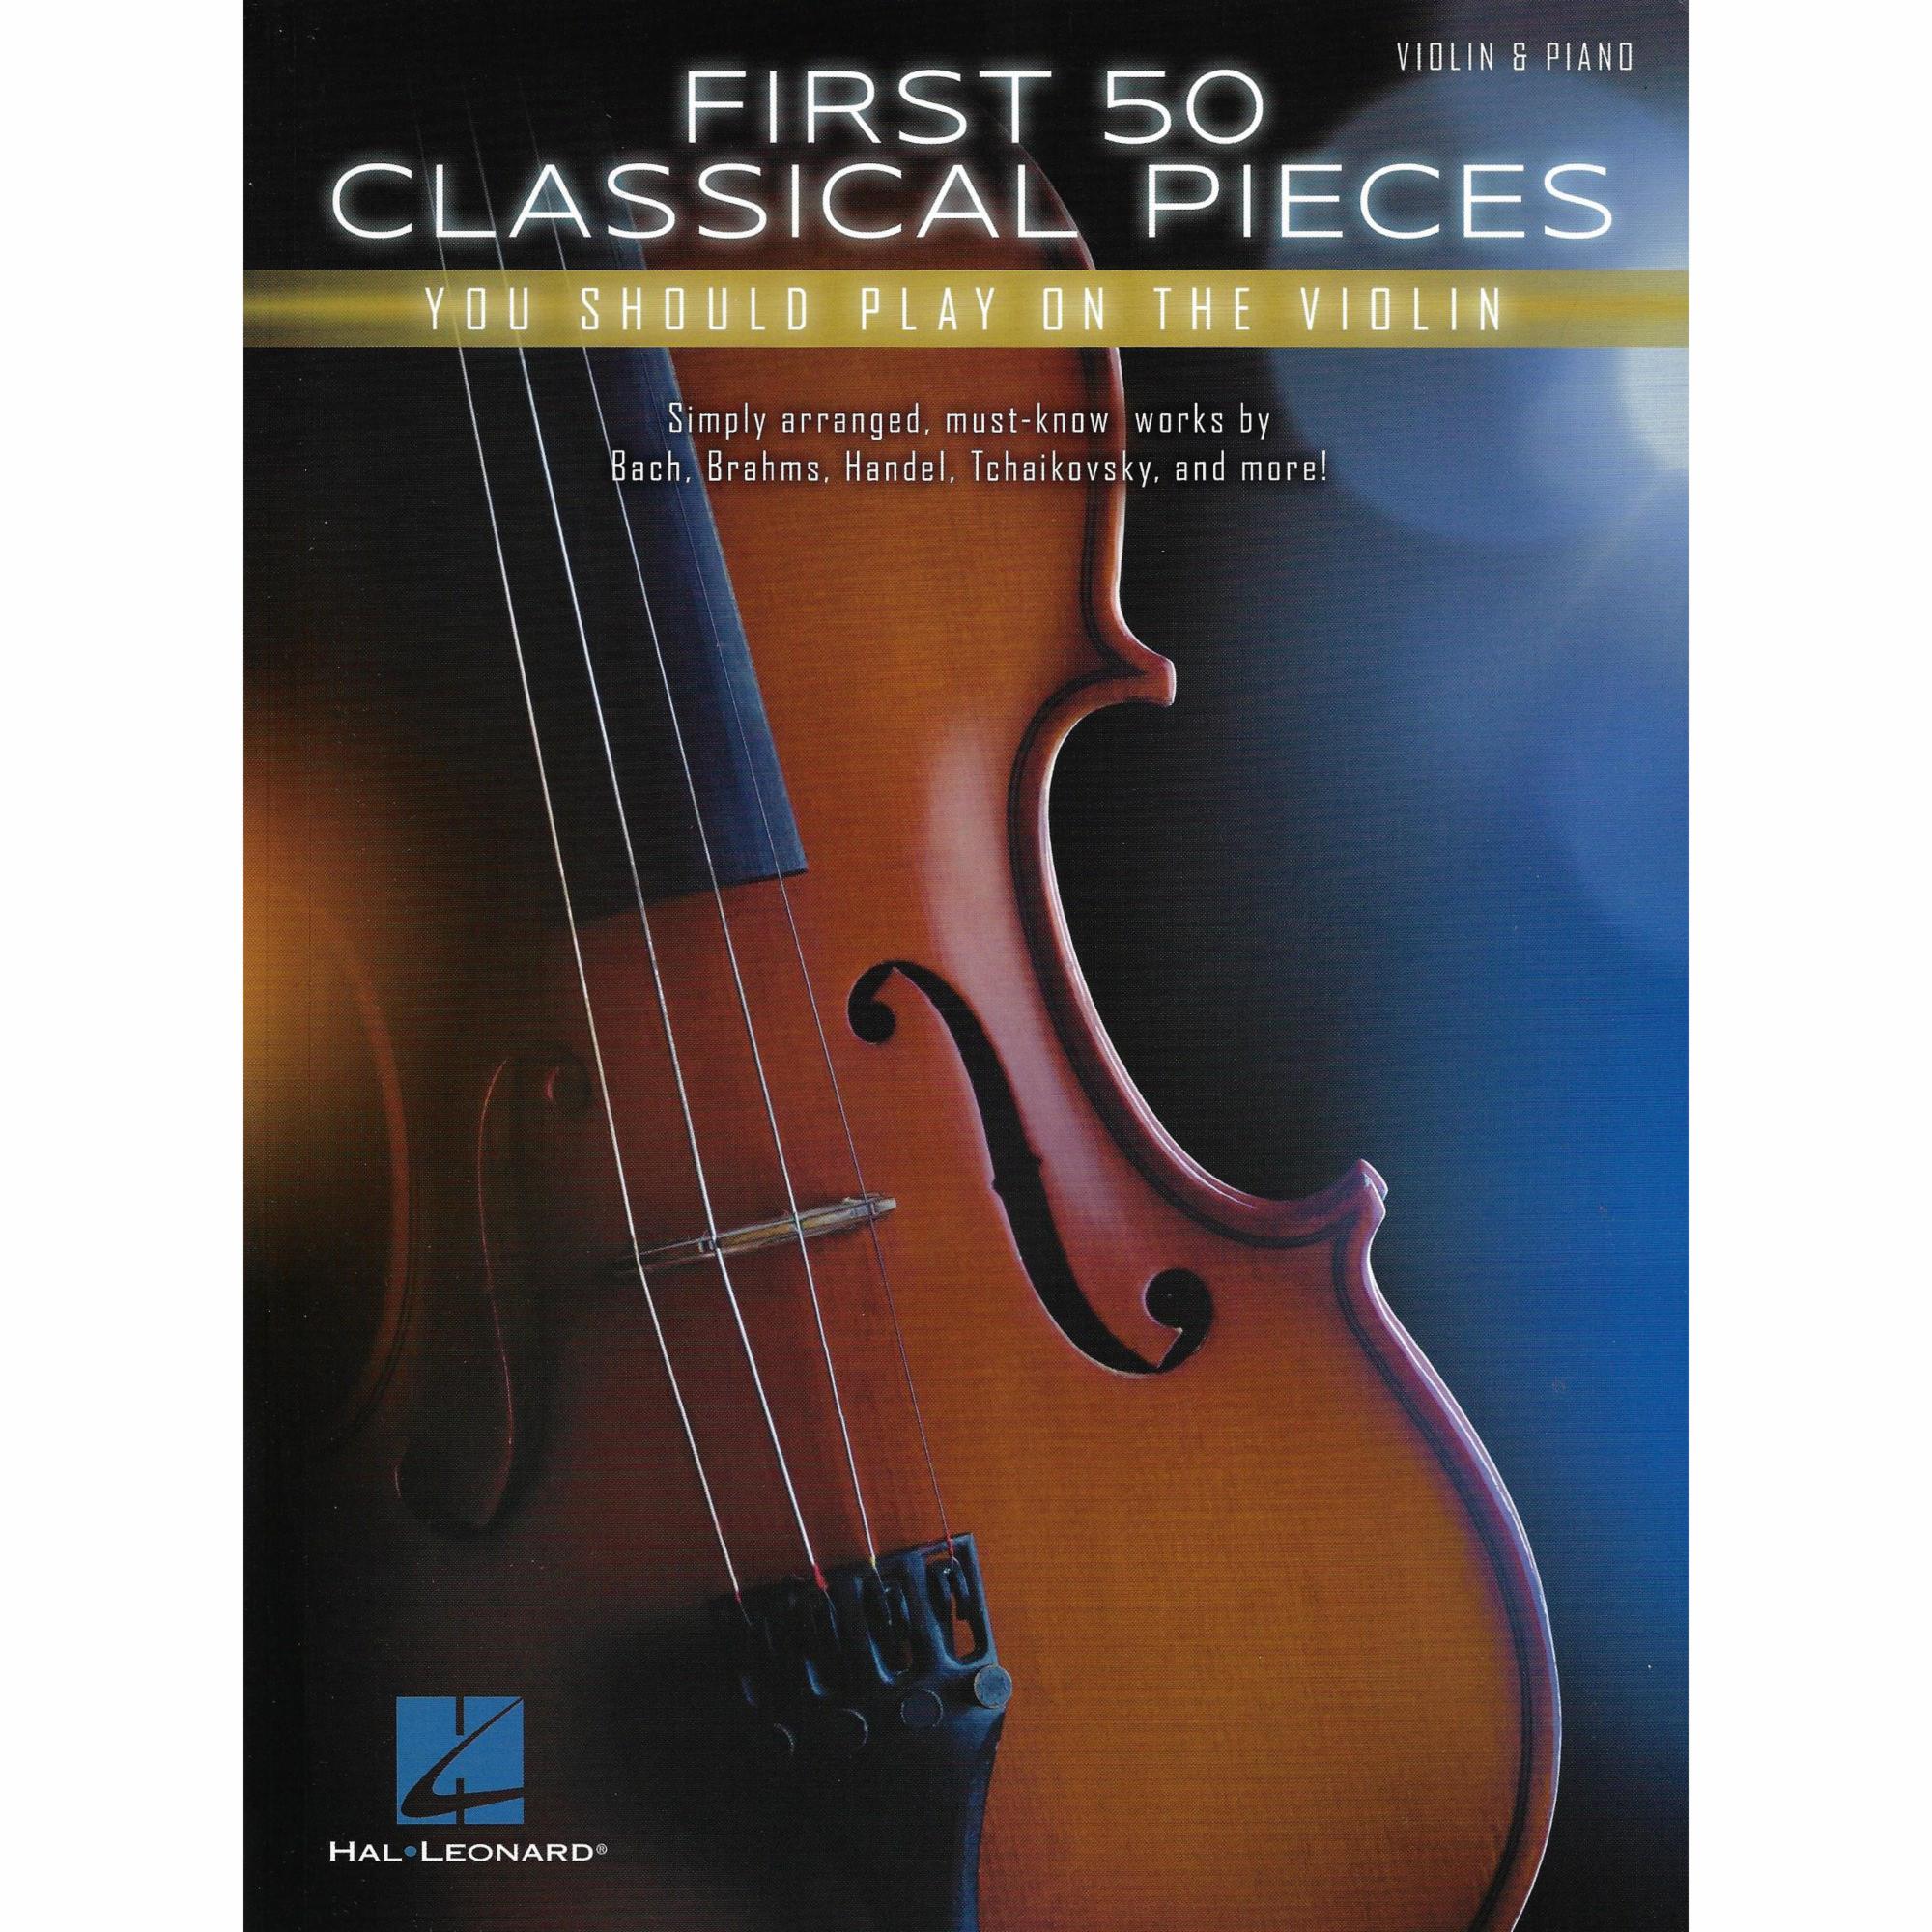 First 50 Classical Pieces